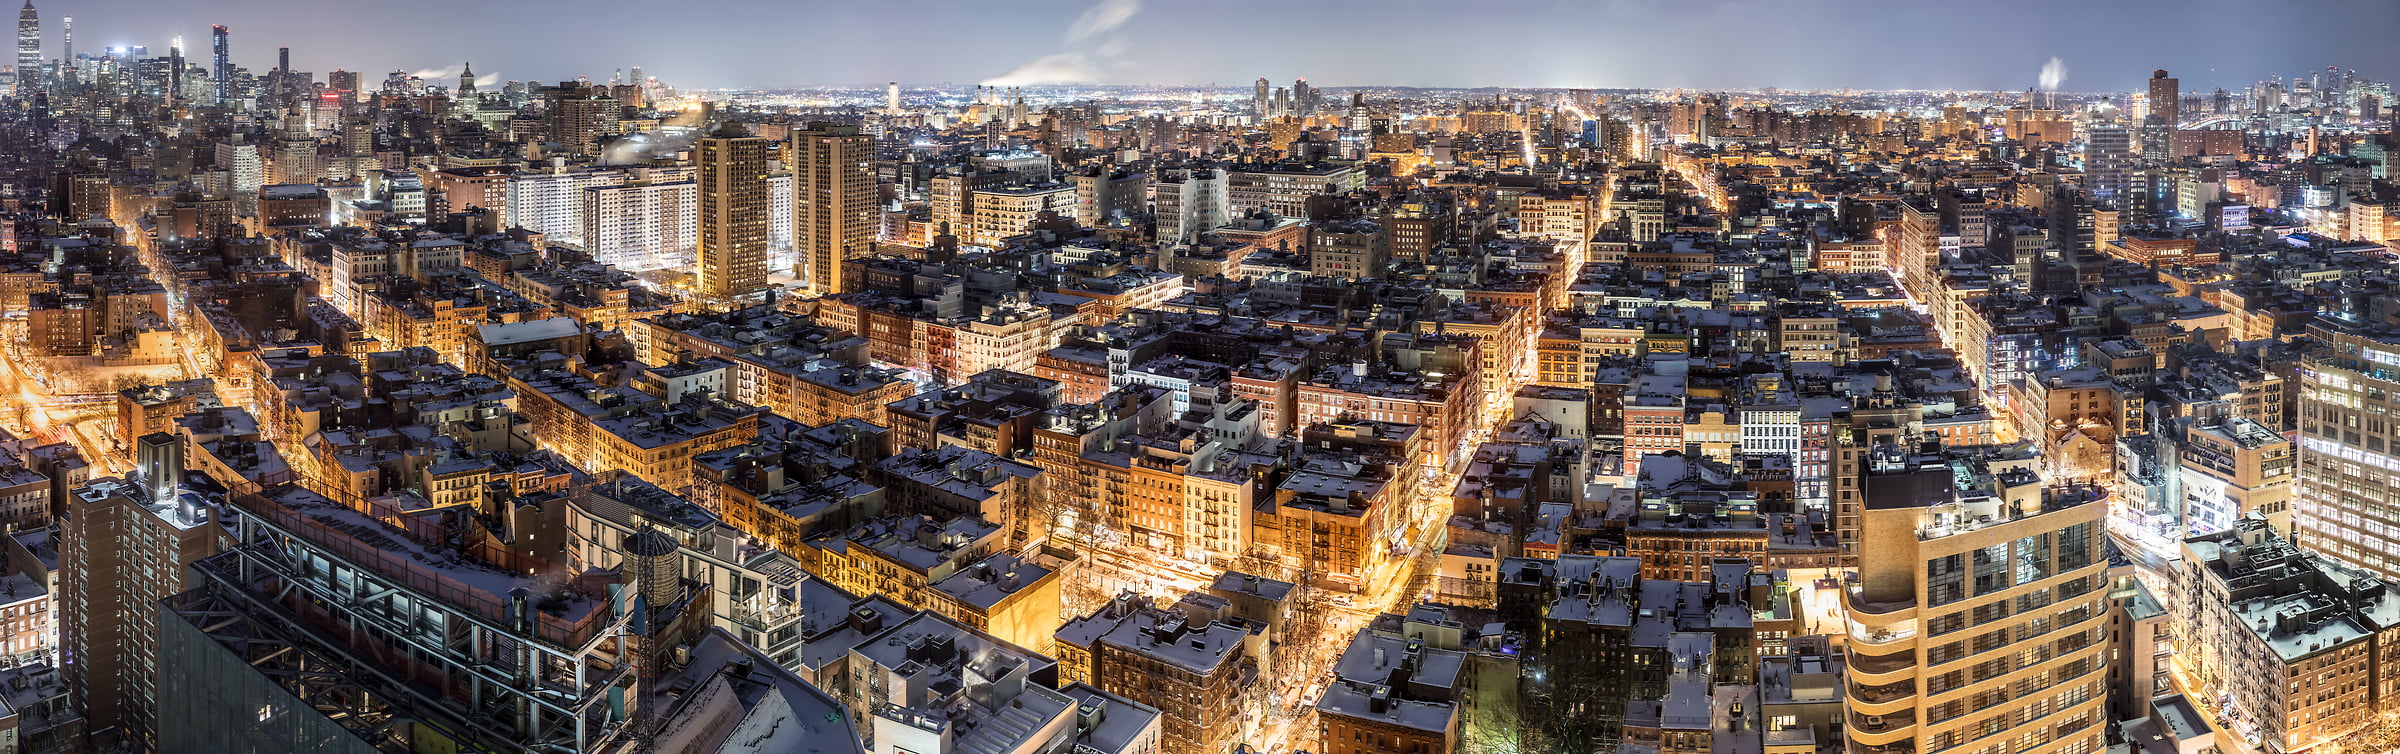 1,051 megapixels! A very high resolution, large-format VAST photo print of the SoHo skyline in NYC in winter snow at night; cityscape fine art photo created by Dan Piech in New York City